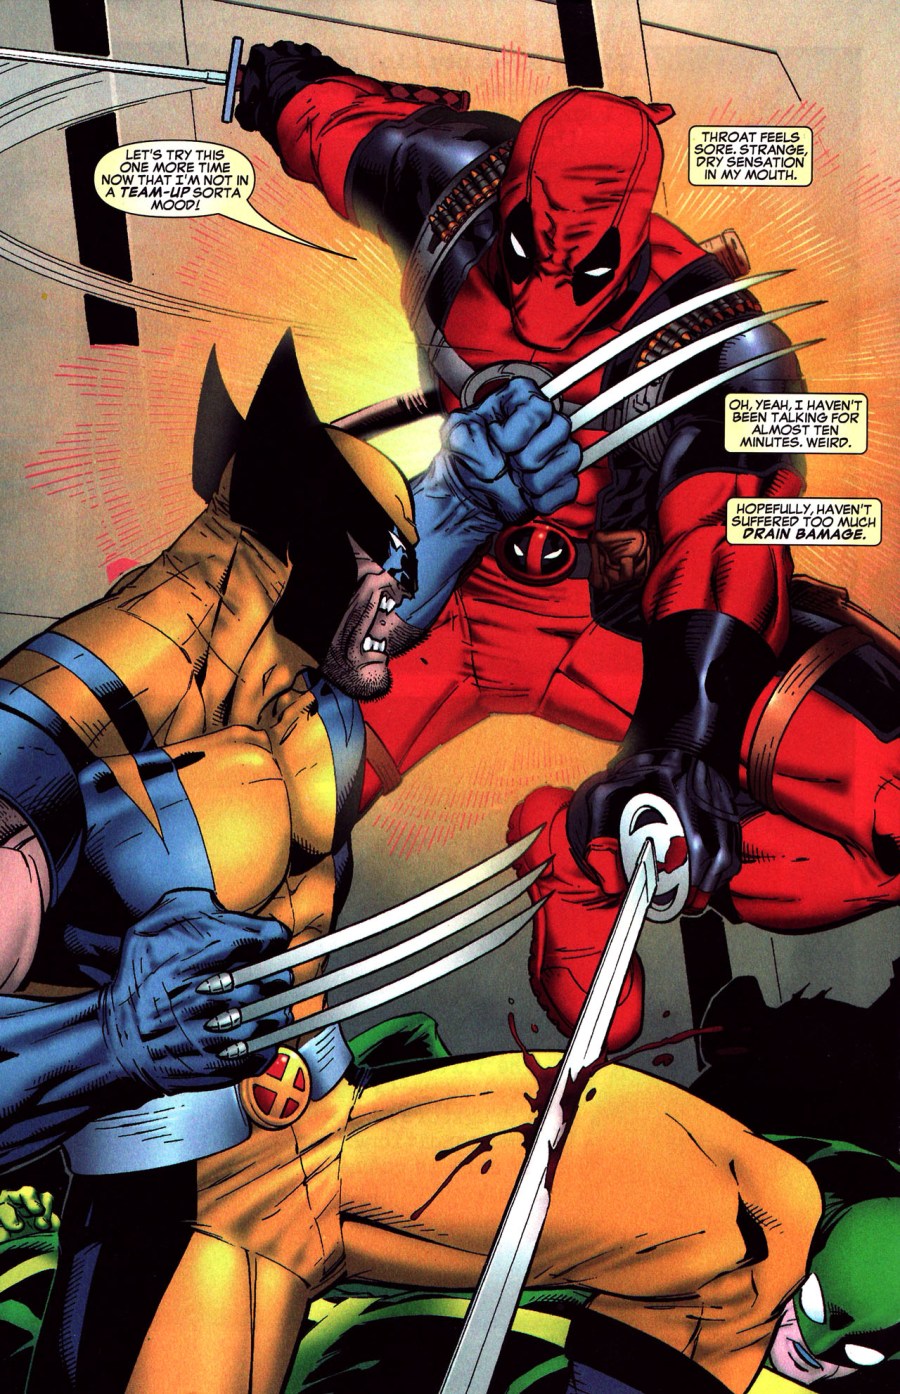 Wolverine and Deadpool come to blows in Cable & Deadpool Vol. 1 #44 "Head Games" (2007), Marvel Comics. Words by Fabian Nicieza, art by Ron Lim, Jeremy Freeman, John Dell, Gotham, Sotocolor, and Dave Sharpe.